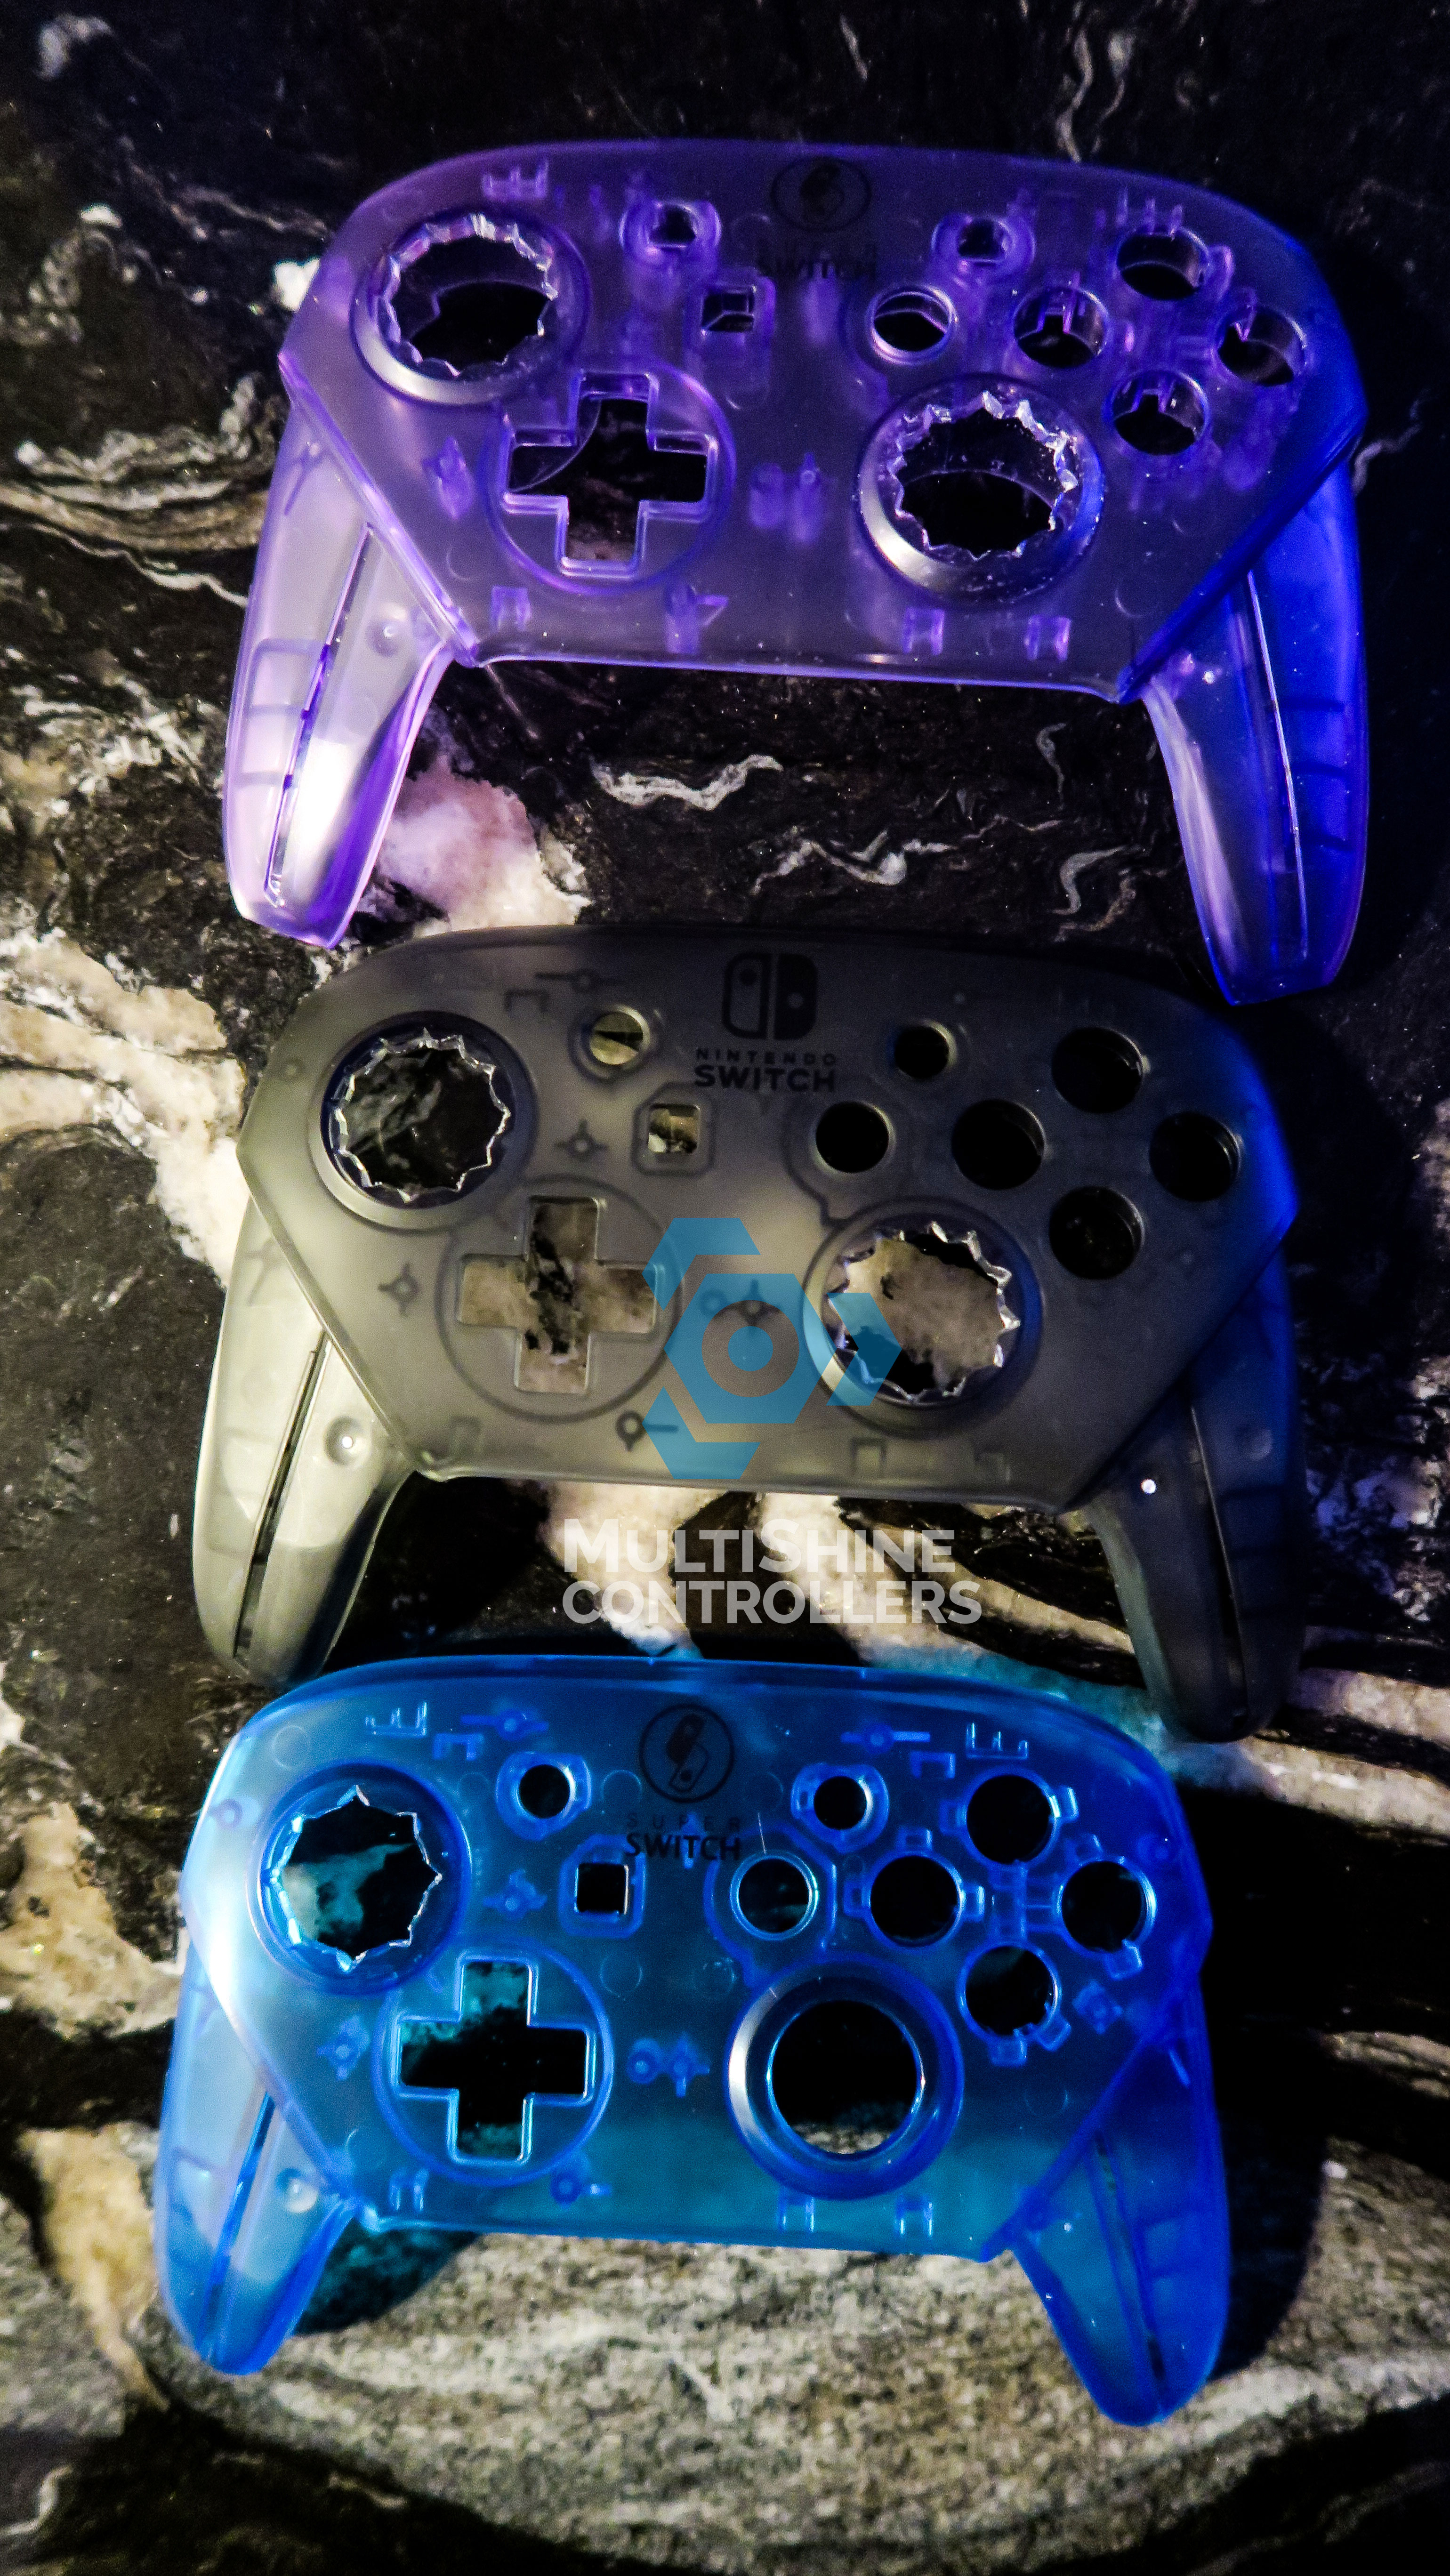 clear pro controller